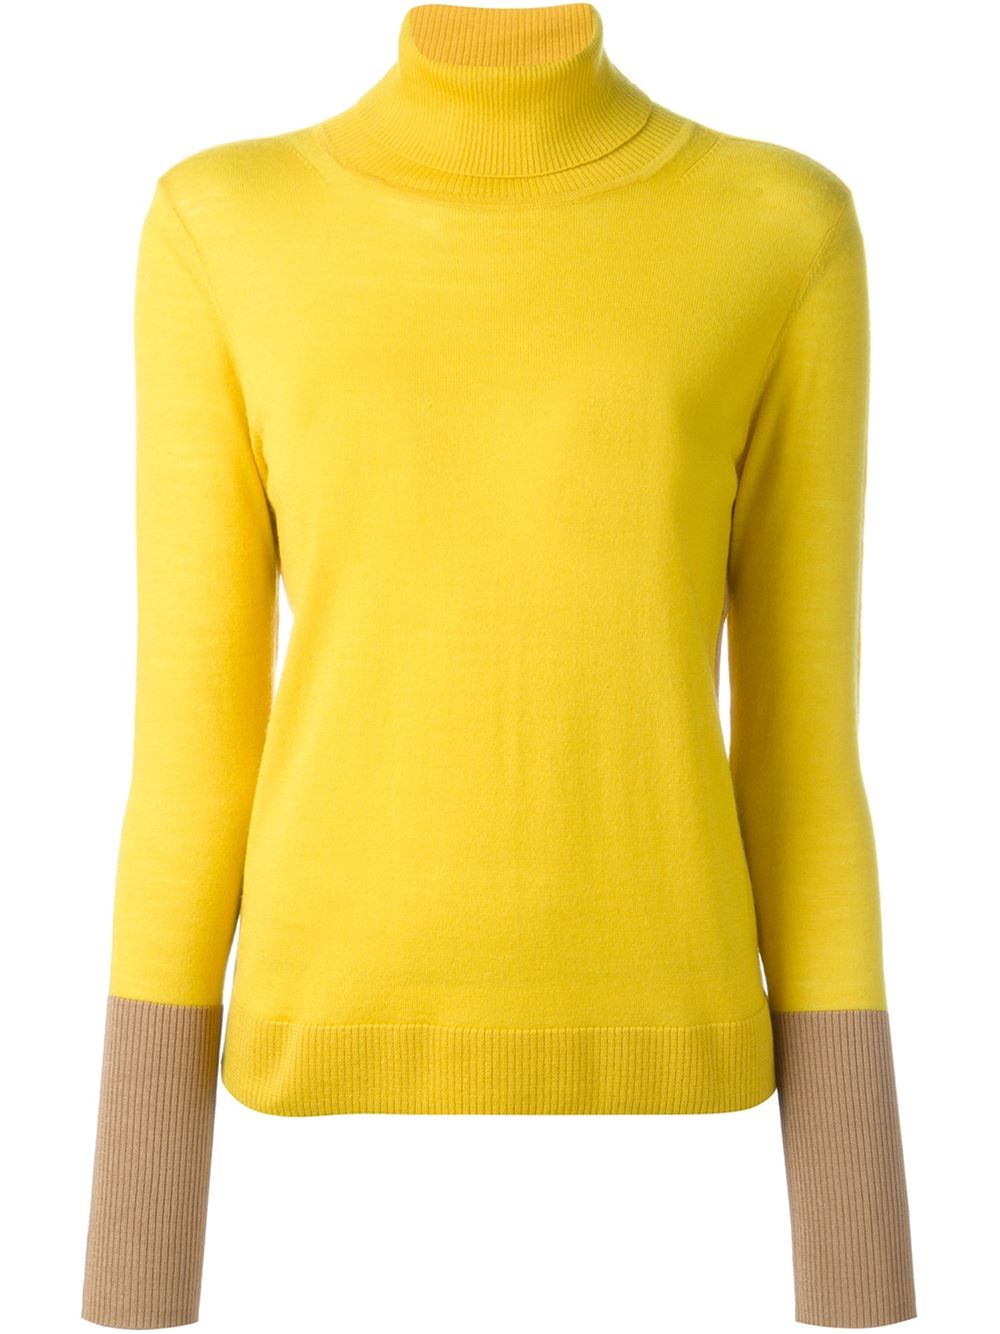 Yellow stretch merino wool blend colour block turtleneck sweater from Rag and Bone